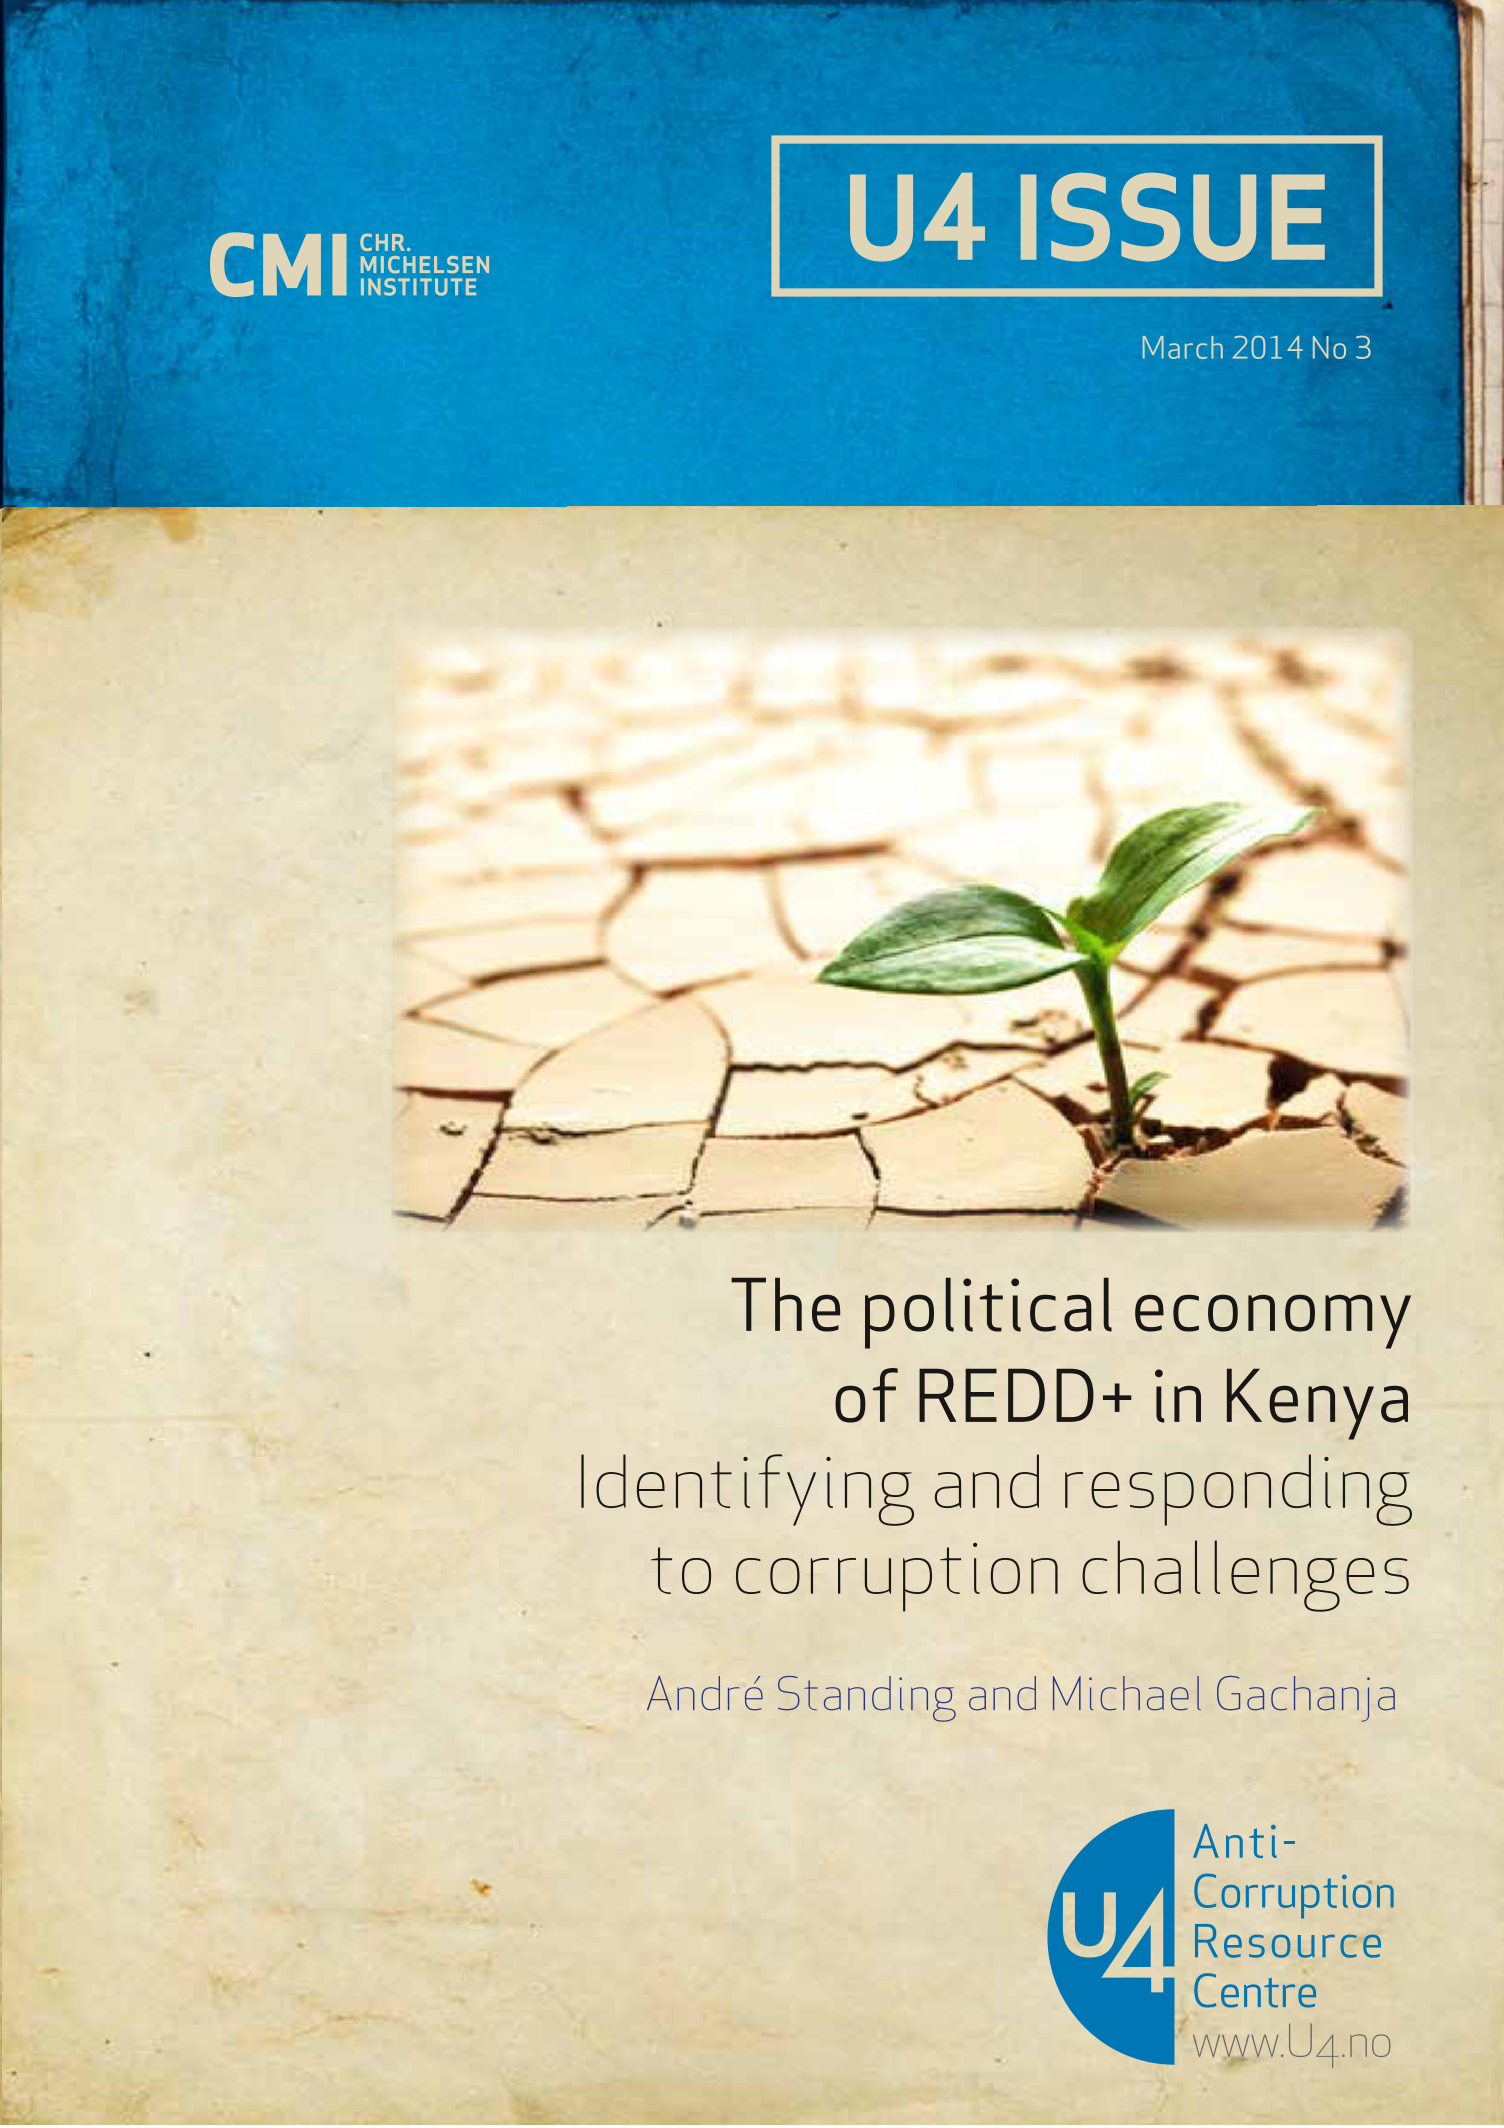 The political economy  of REDD+ in Kenya: Identifying and responding  to corruption challenges